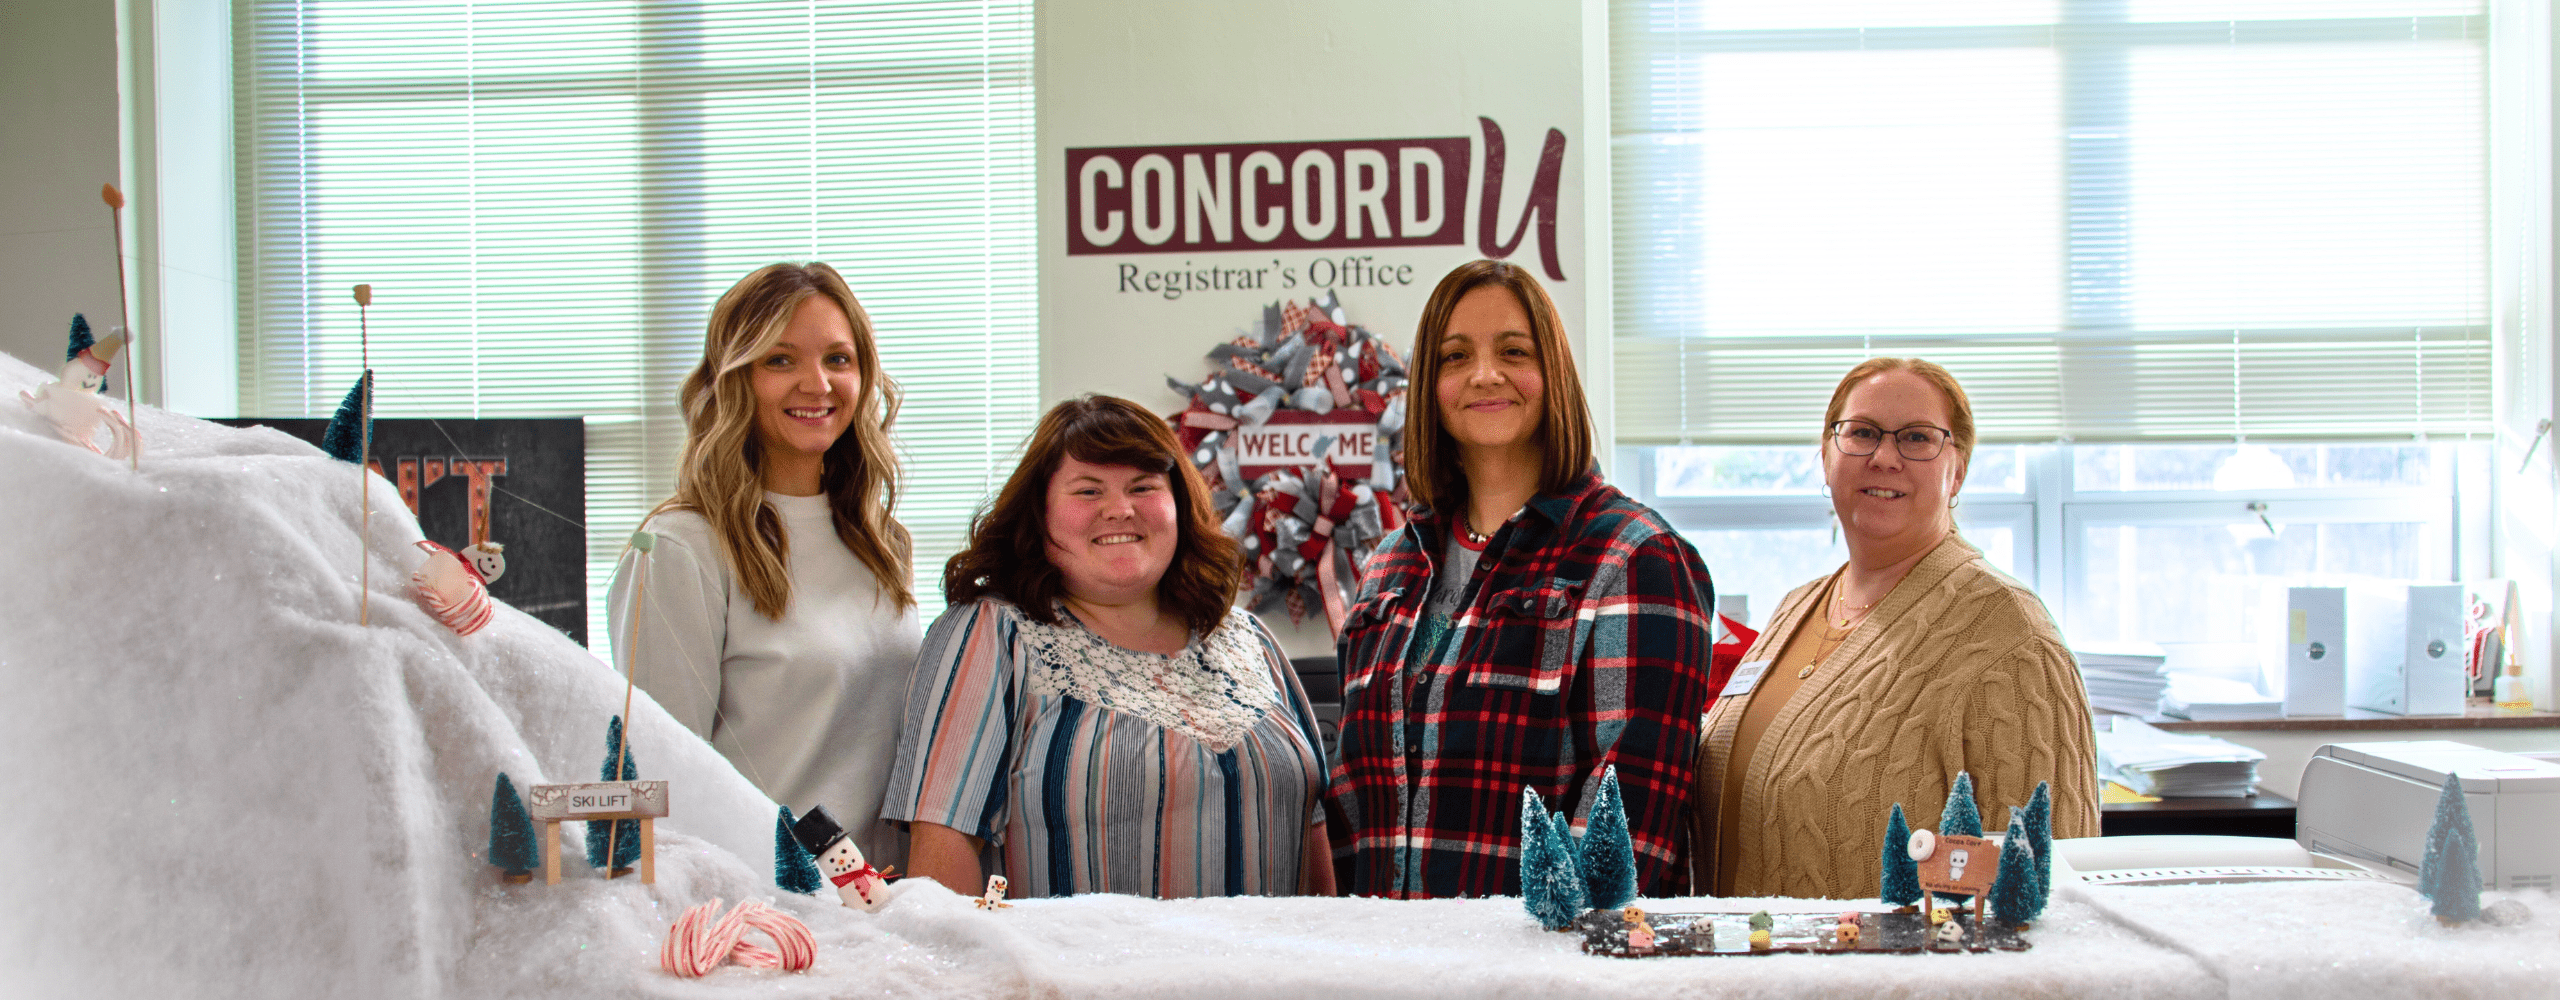 Emily Miller, Brianna Lipscomb, Lucinda Gonderman, and Sheilah Sites pictured behind the Concord University Registrar's Office front desk